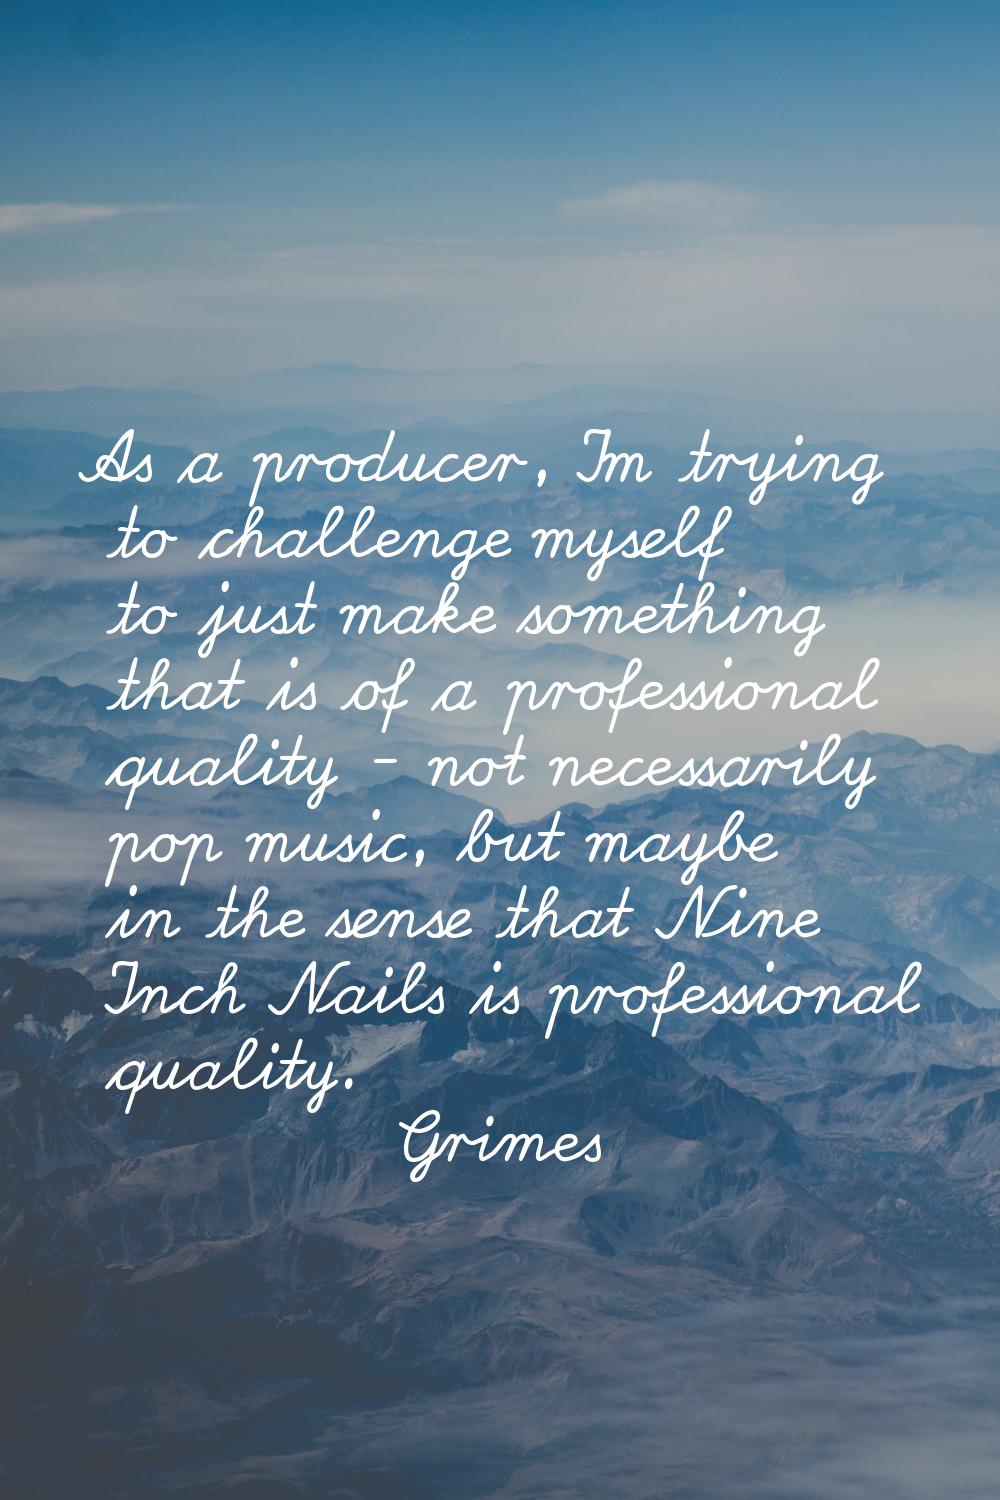 As a producer, I'm trying to challenge myself to just make something that is of a professional qual